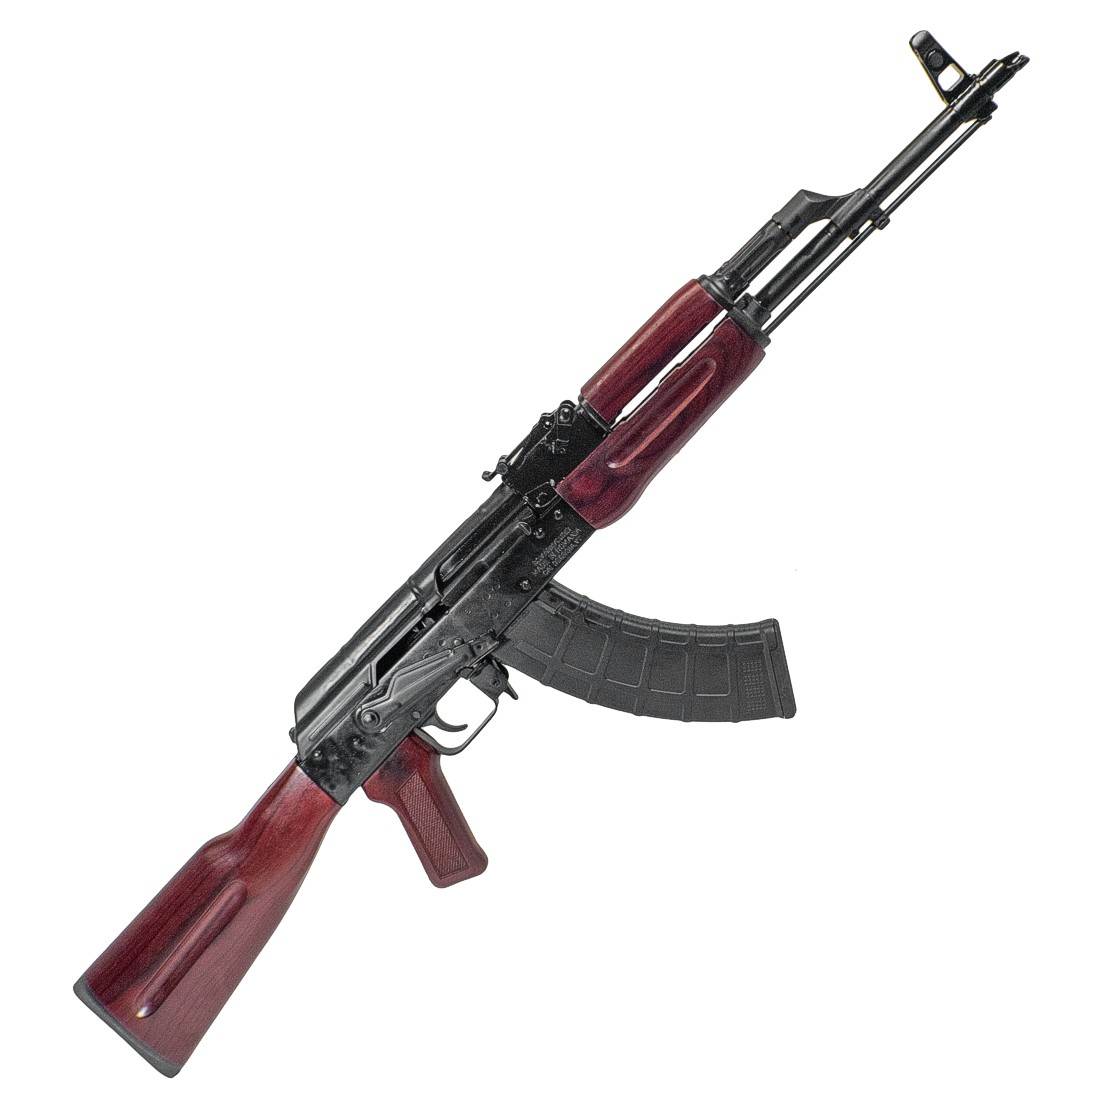 Tss Ak 47 Red Star 7 62 39 Wasr Texas Shooter S Supply